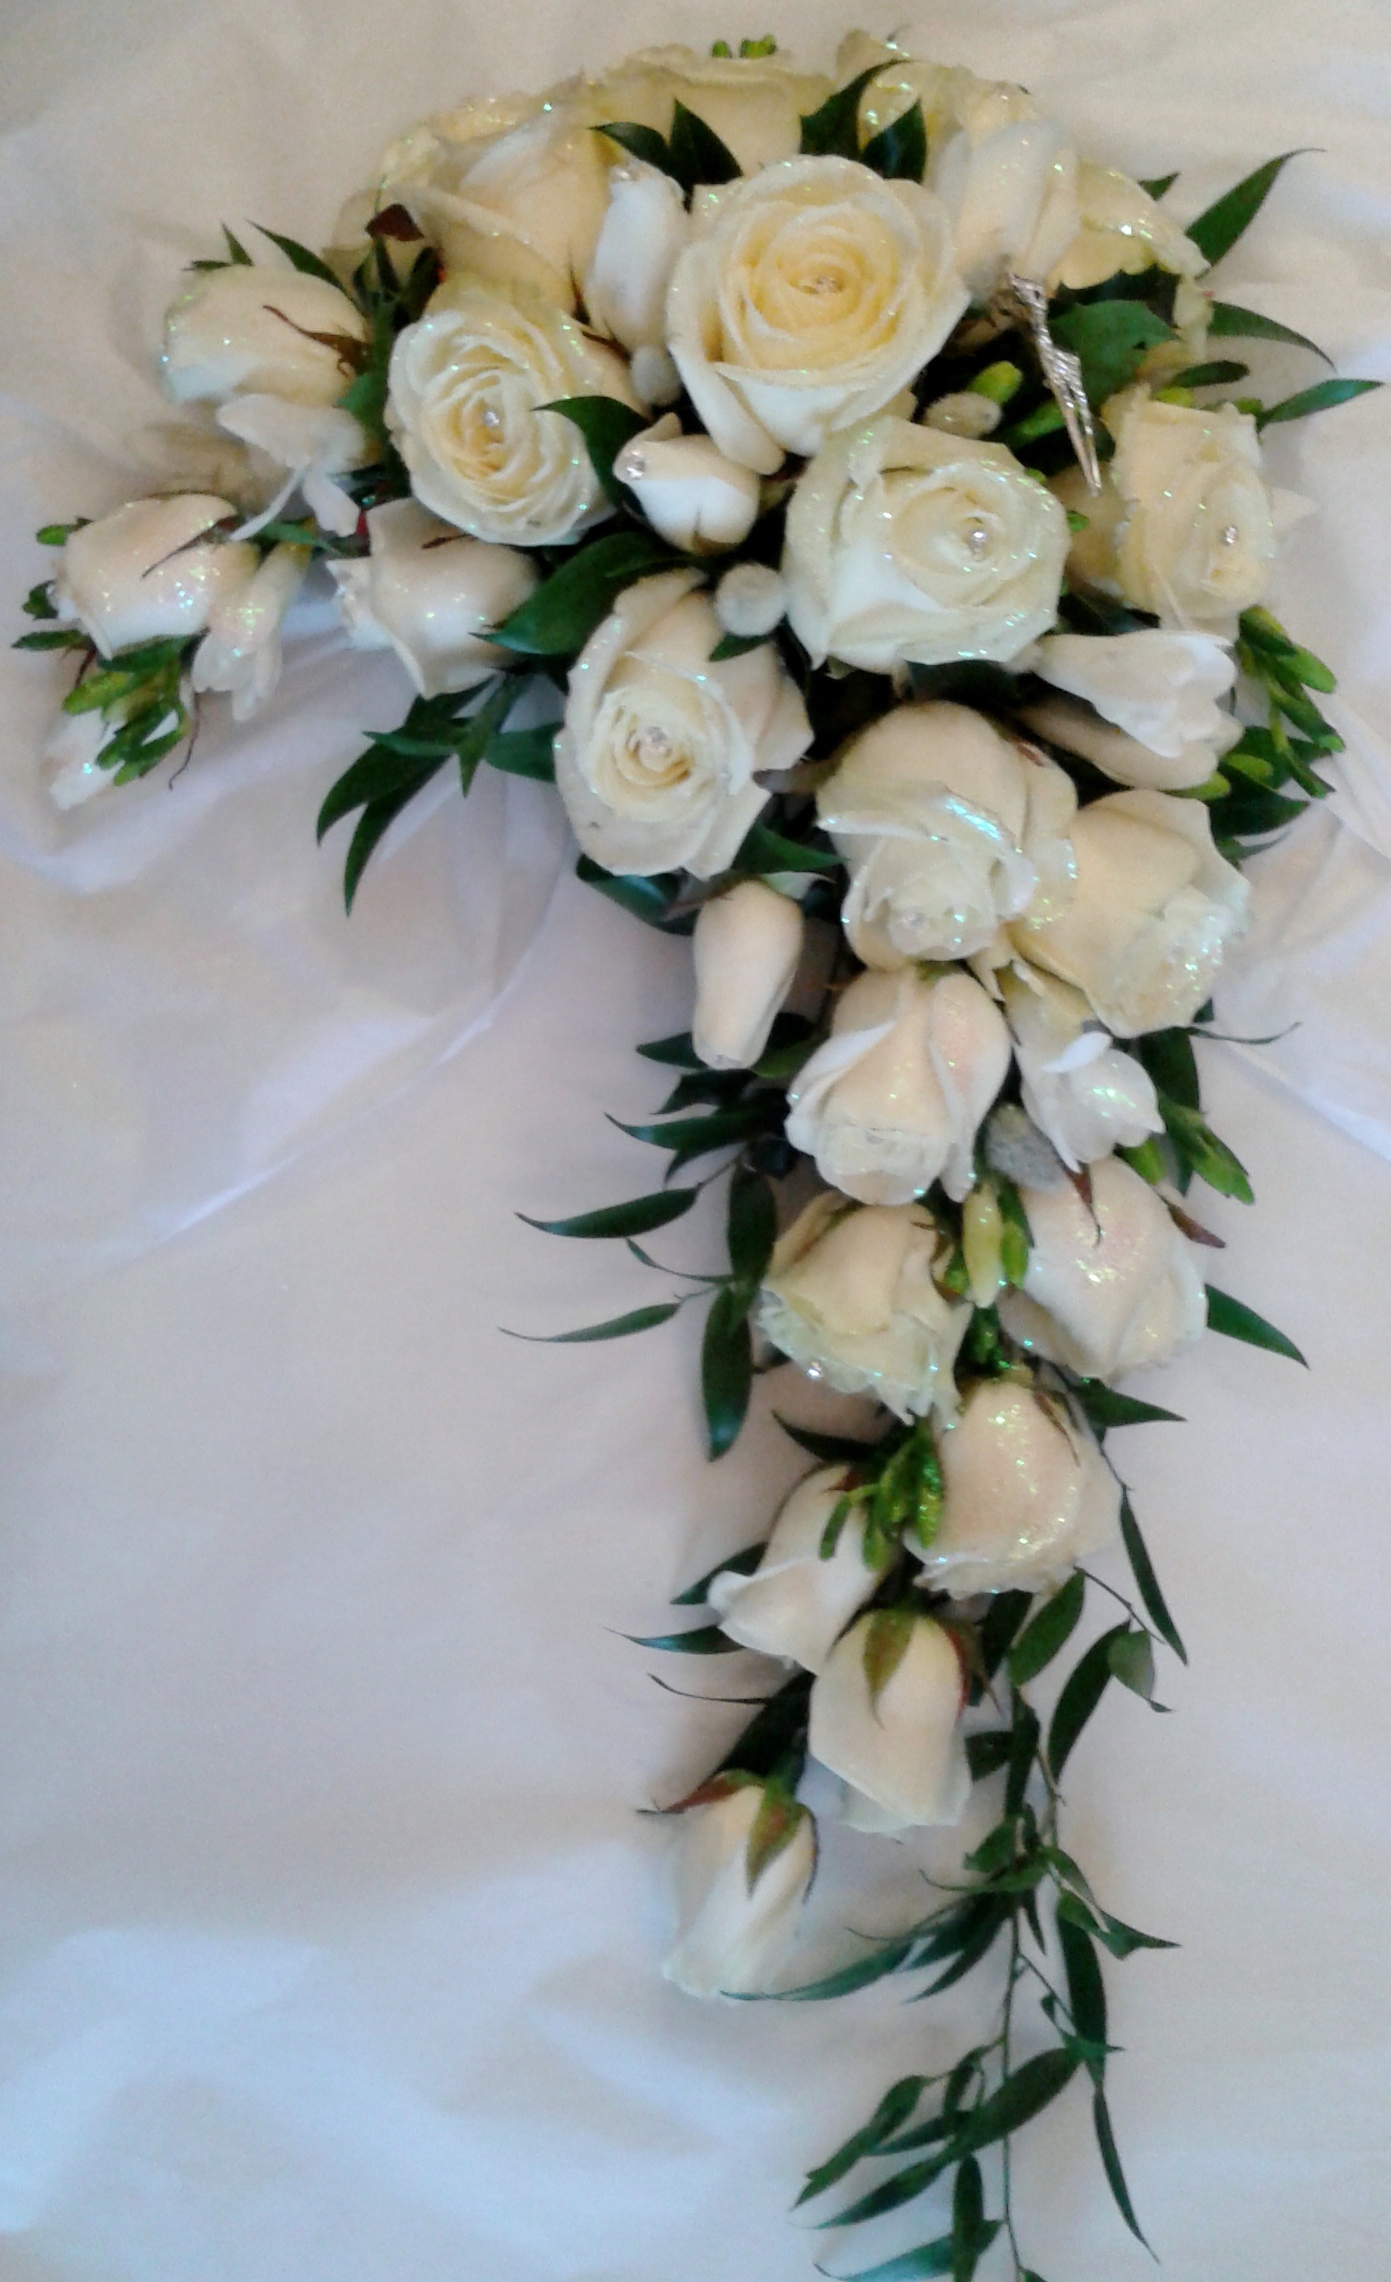 showers bouquet ivory crystalised roses